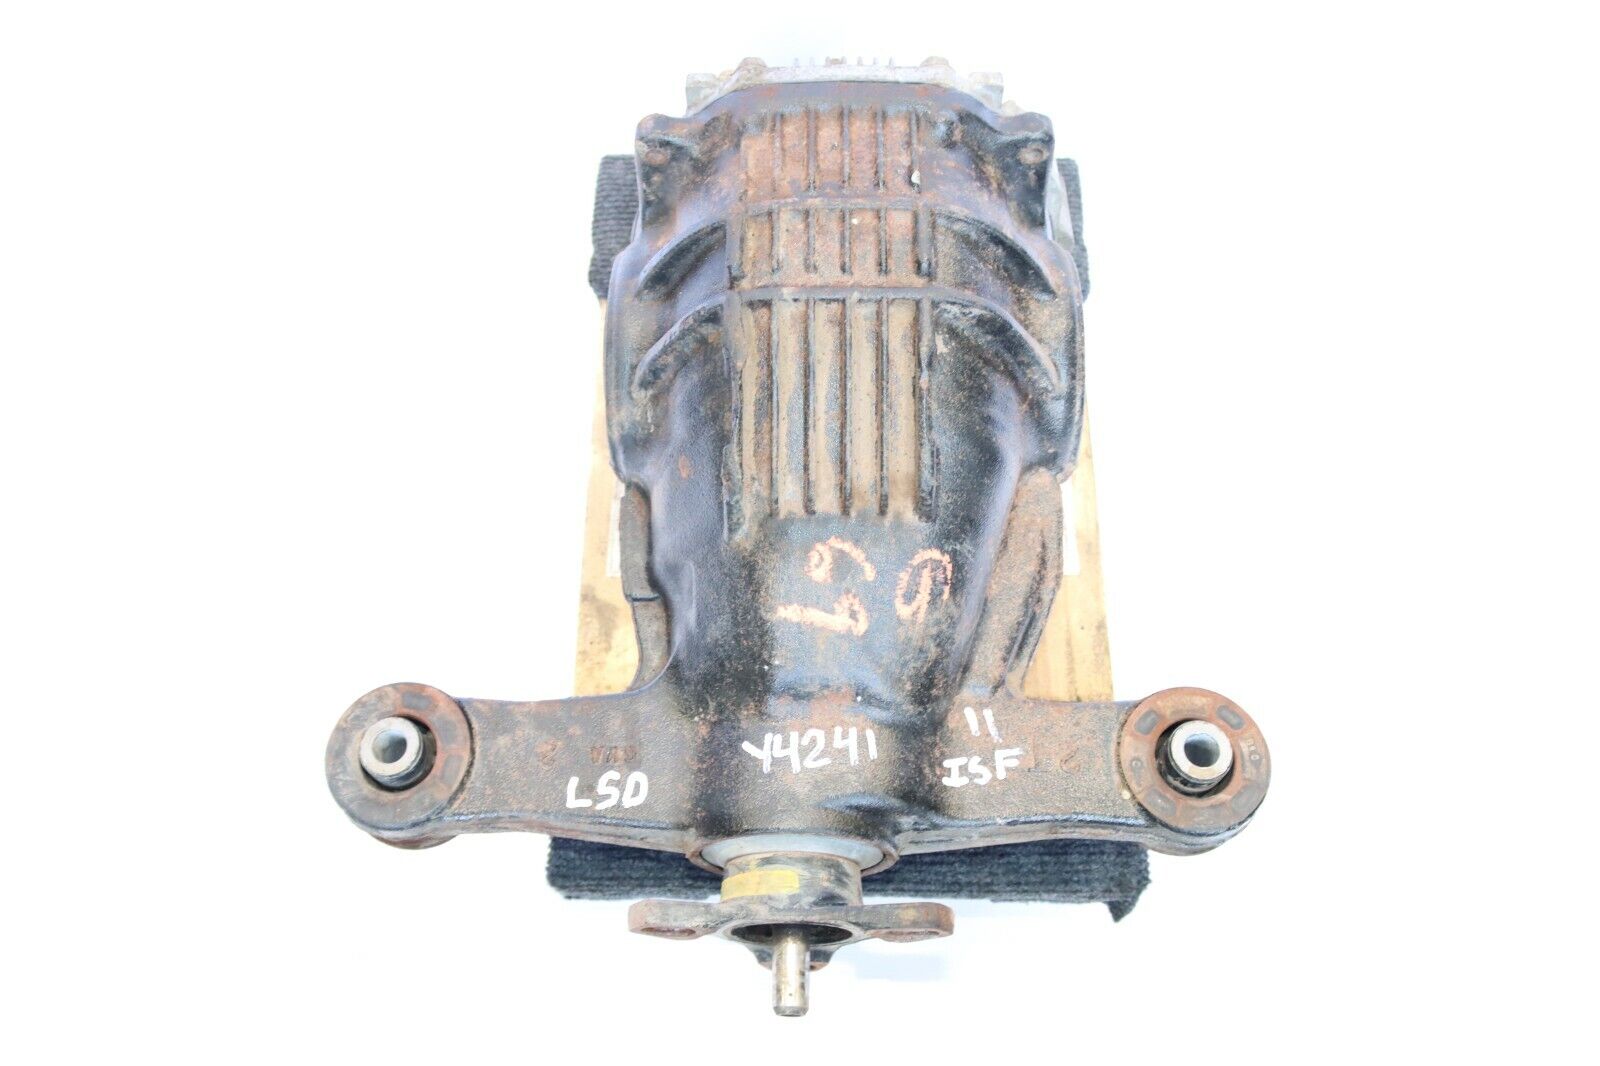 2011-2014 LEXUS IS-F LSD LIMITED SLIP DIFFERENTIAL REAR DIFF ISF Y4241